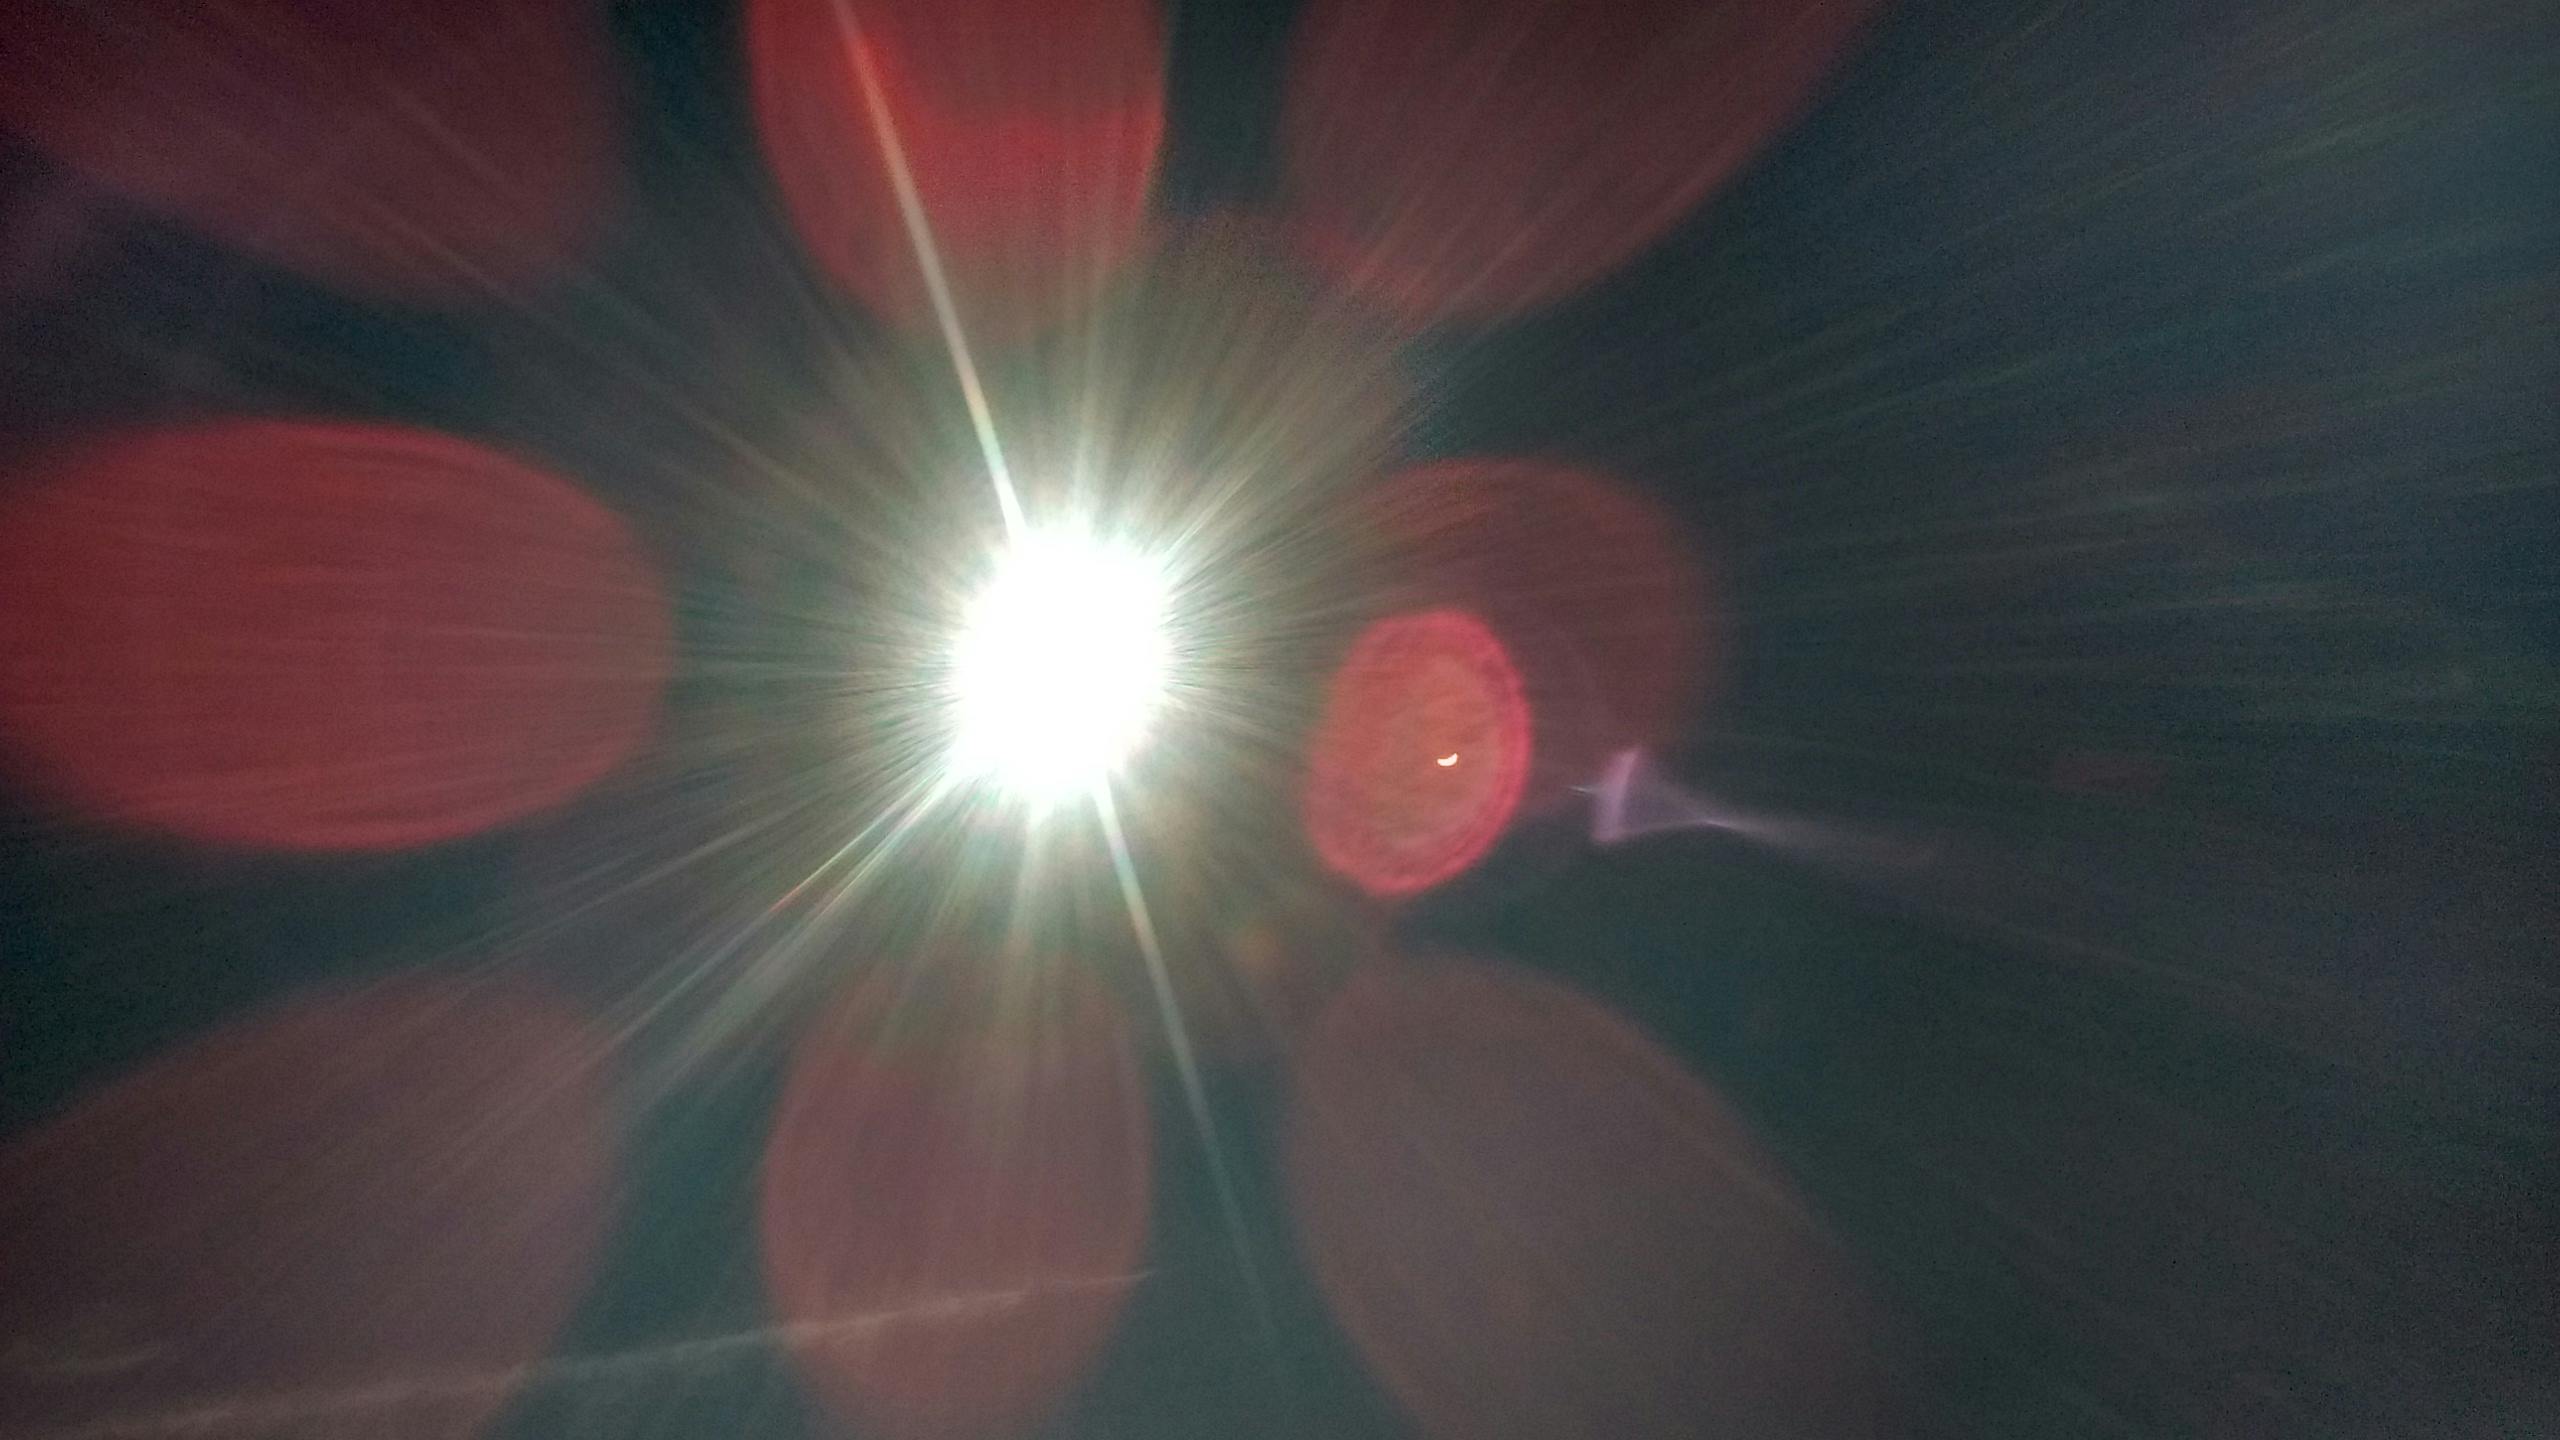 Free stock photo of eclipse, lens flare, moon